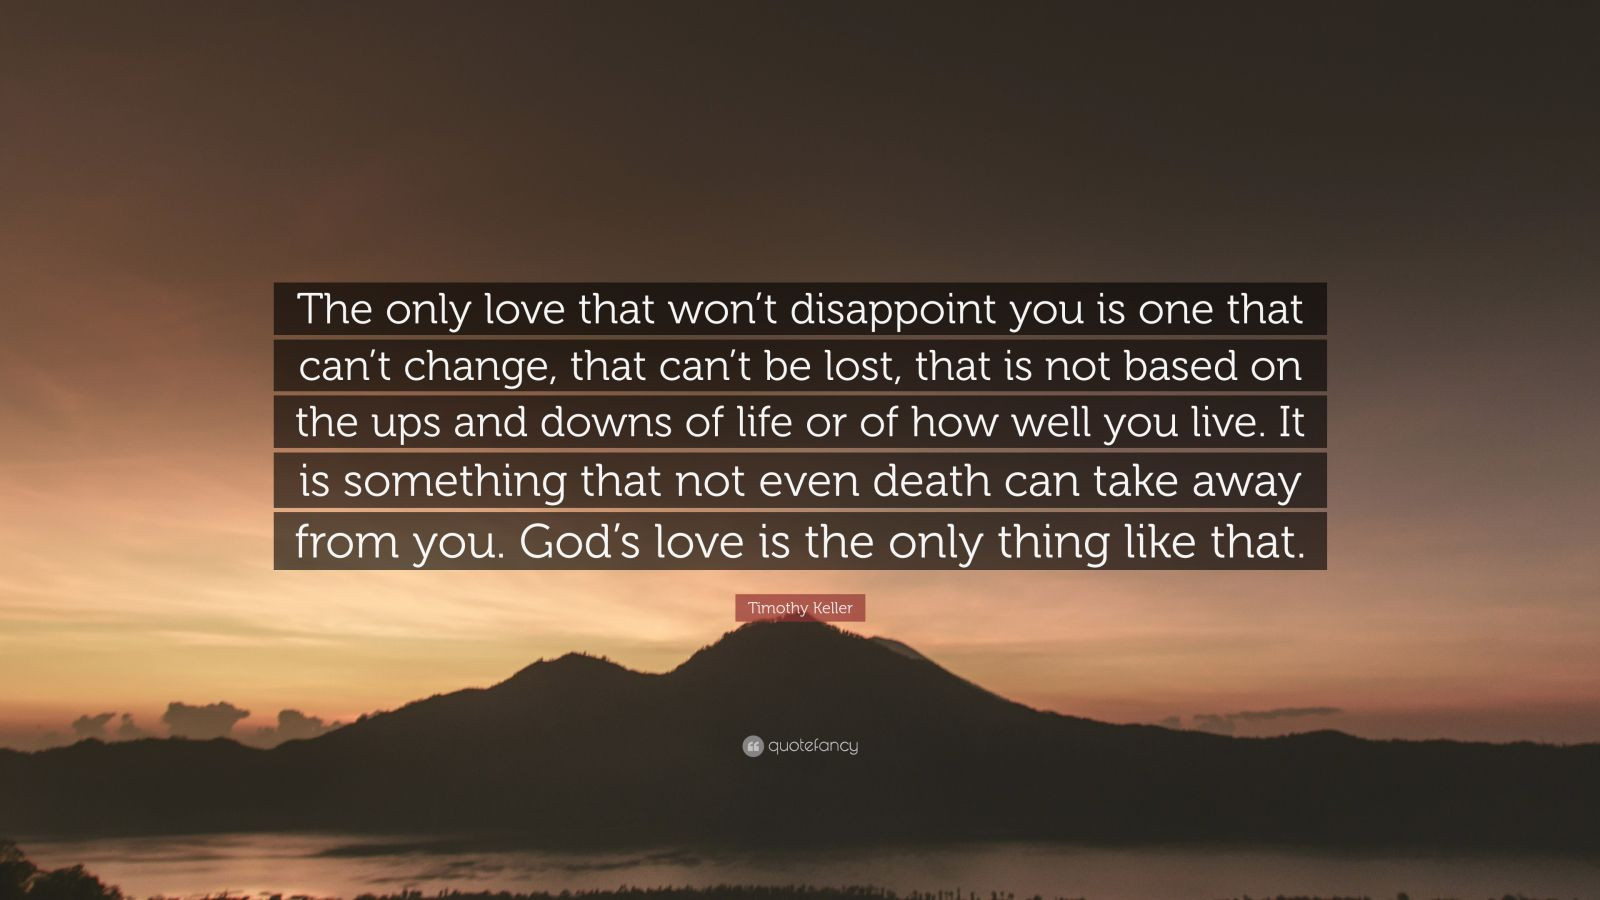 Tim Keller Marriage Quotes
 Timothy Keller Quote “The only love that won’t disappoint